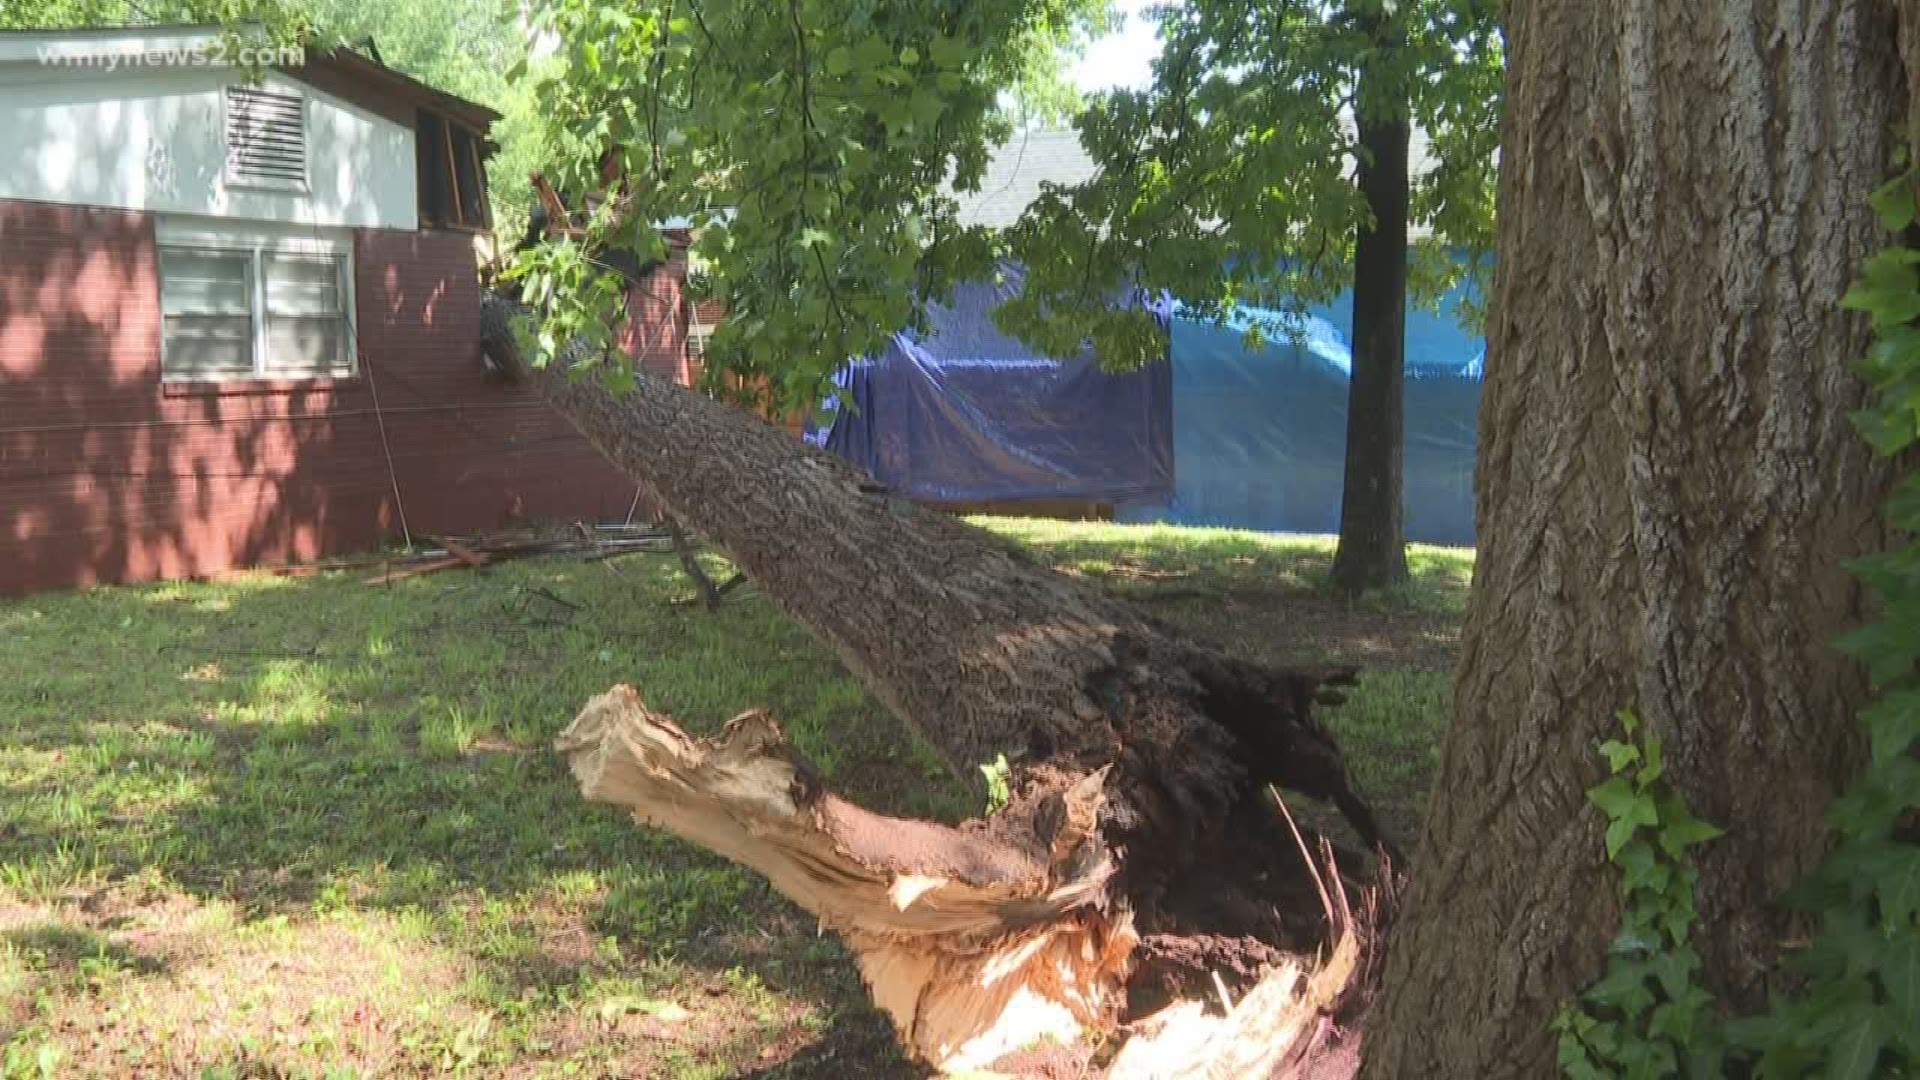 We spoke with the renters who say it was only a couple days ago when they started taking a hard look at the massive tree and decided it need to be taken down but mother nature had other plans.